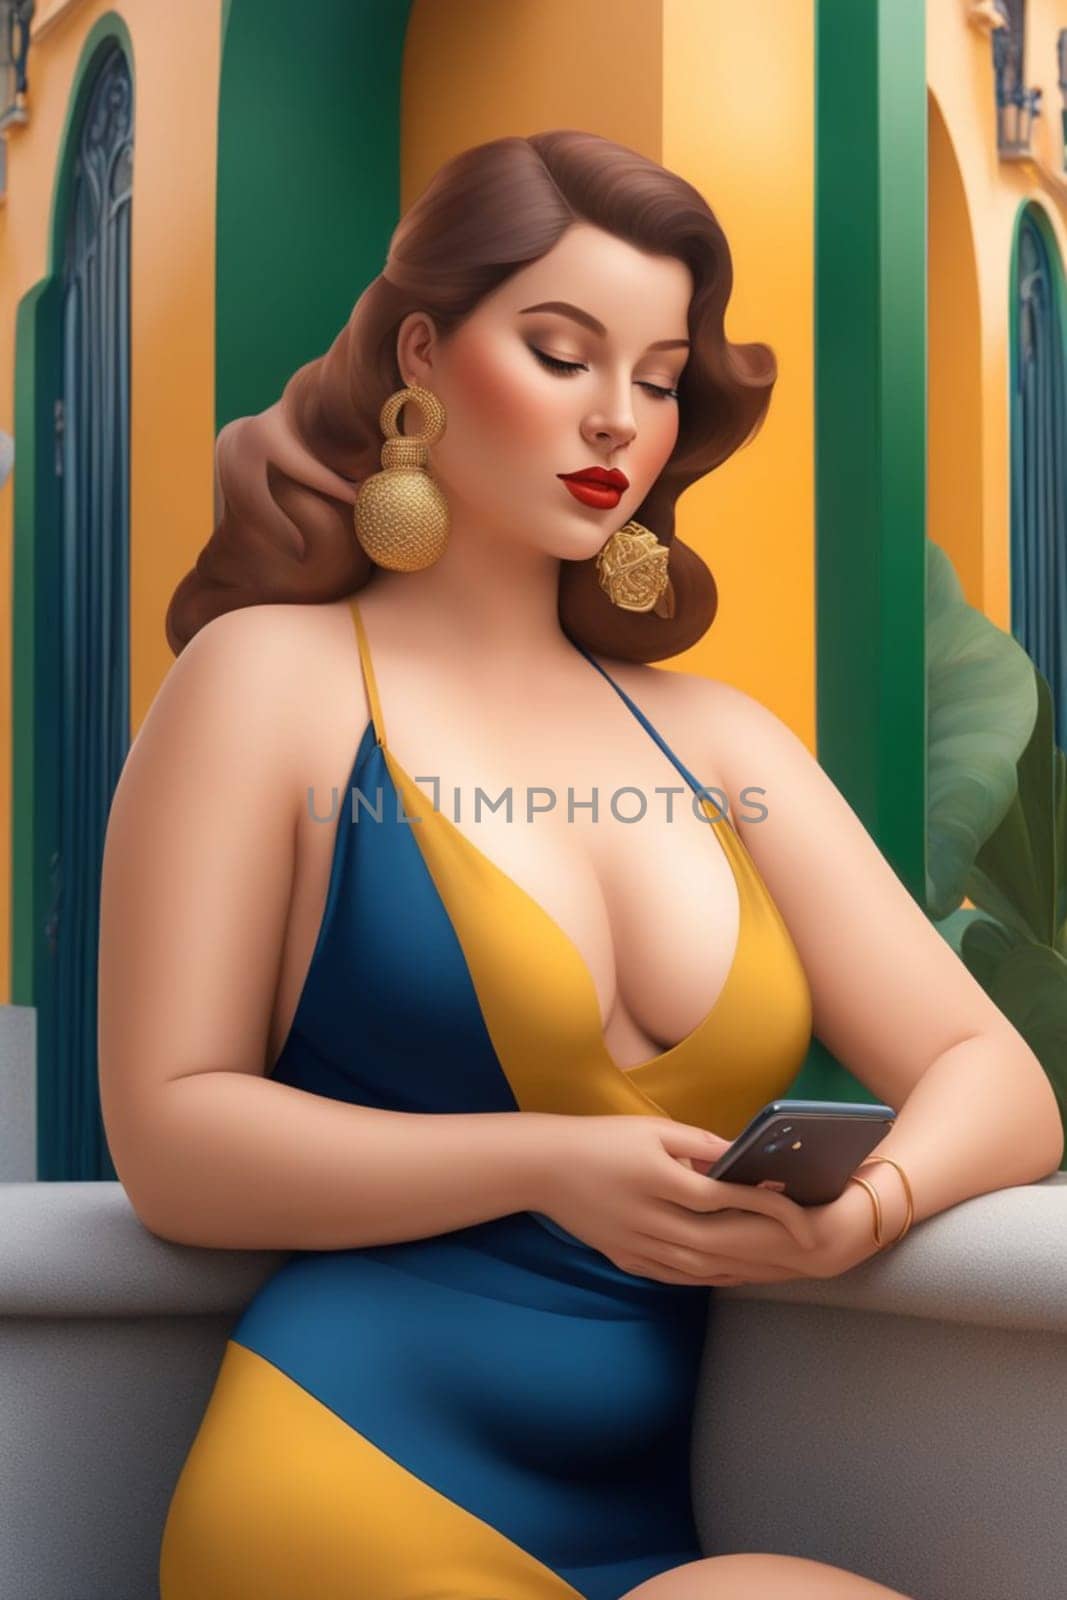 iilustration poster of voluptous female model using smartphone outdoors in a yard in caribbean villa by verbano